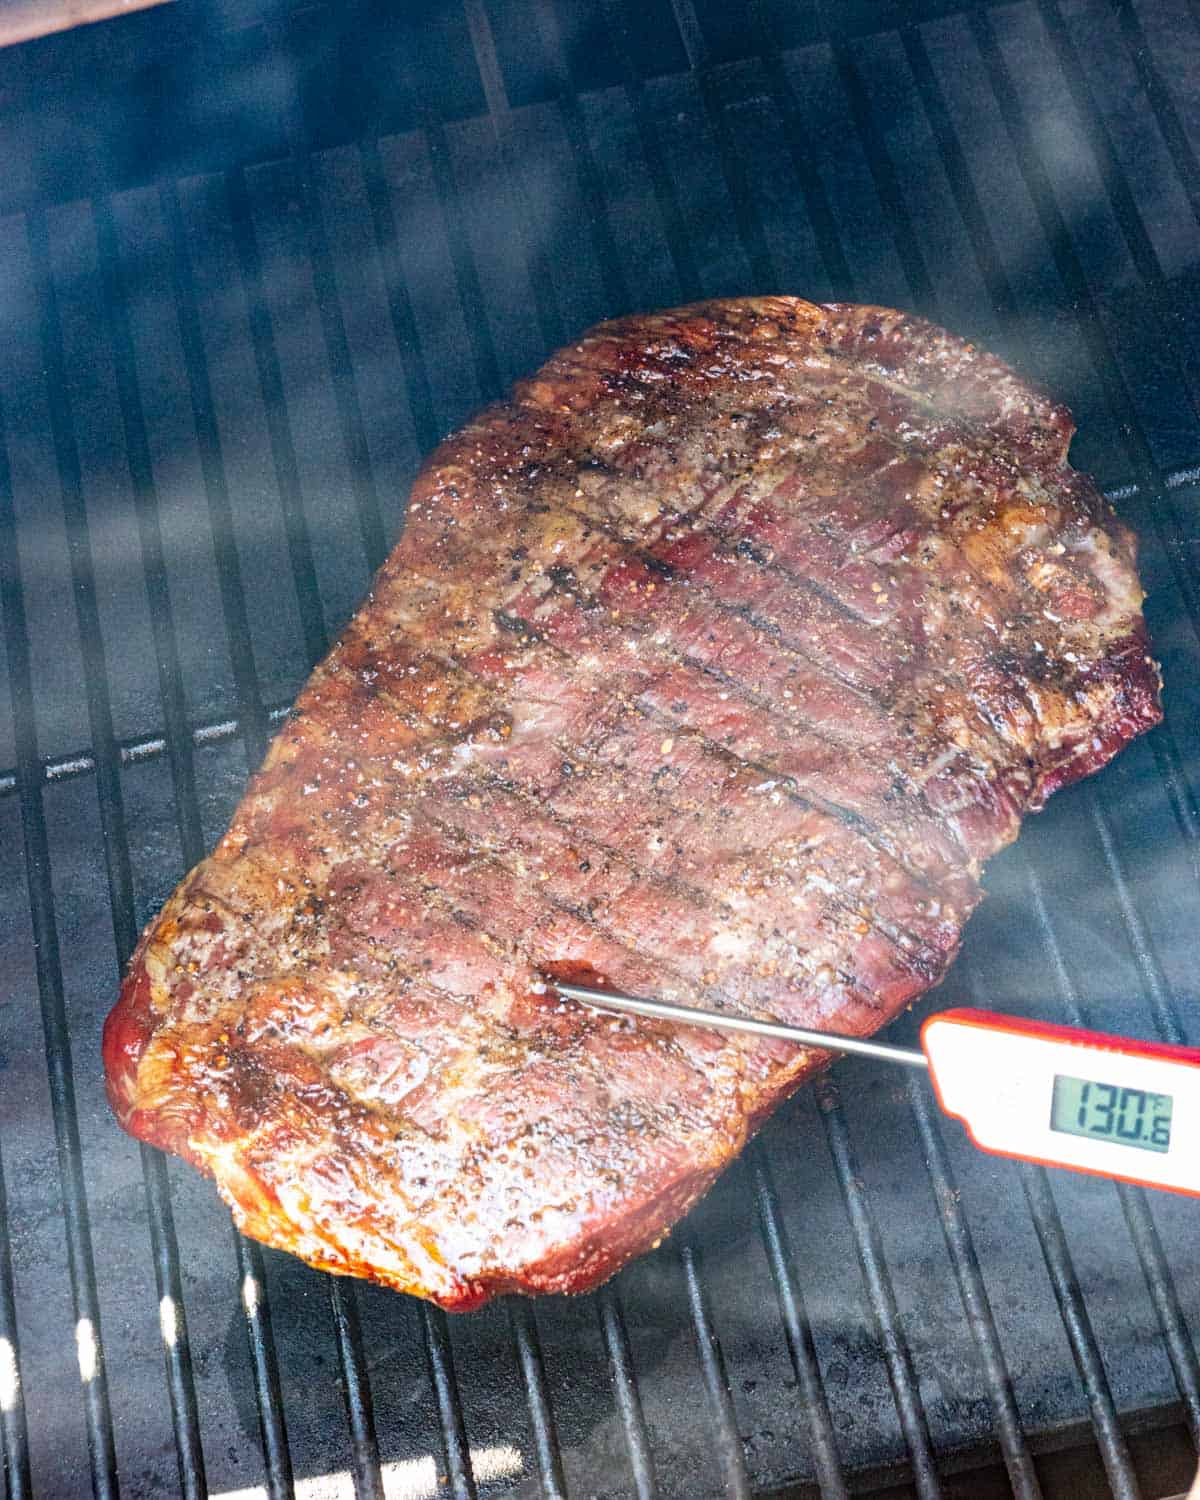 Instant read thermometer poked in seared flank on the smoker to test level of doneness.